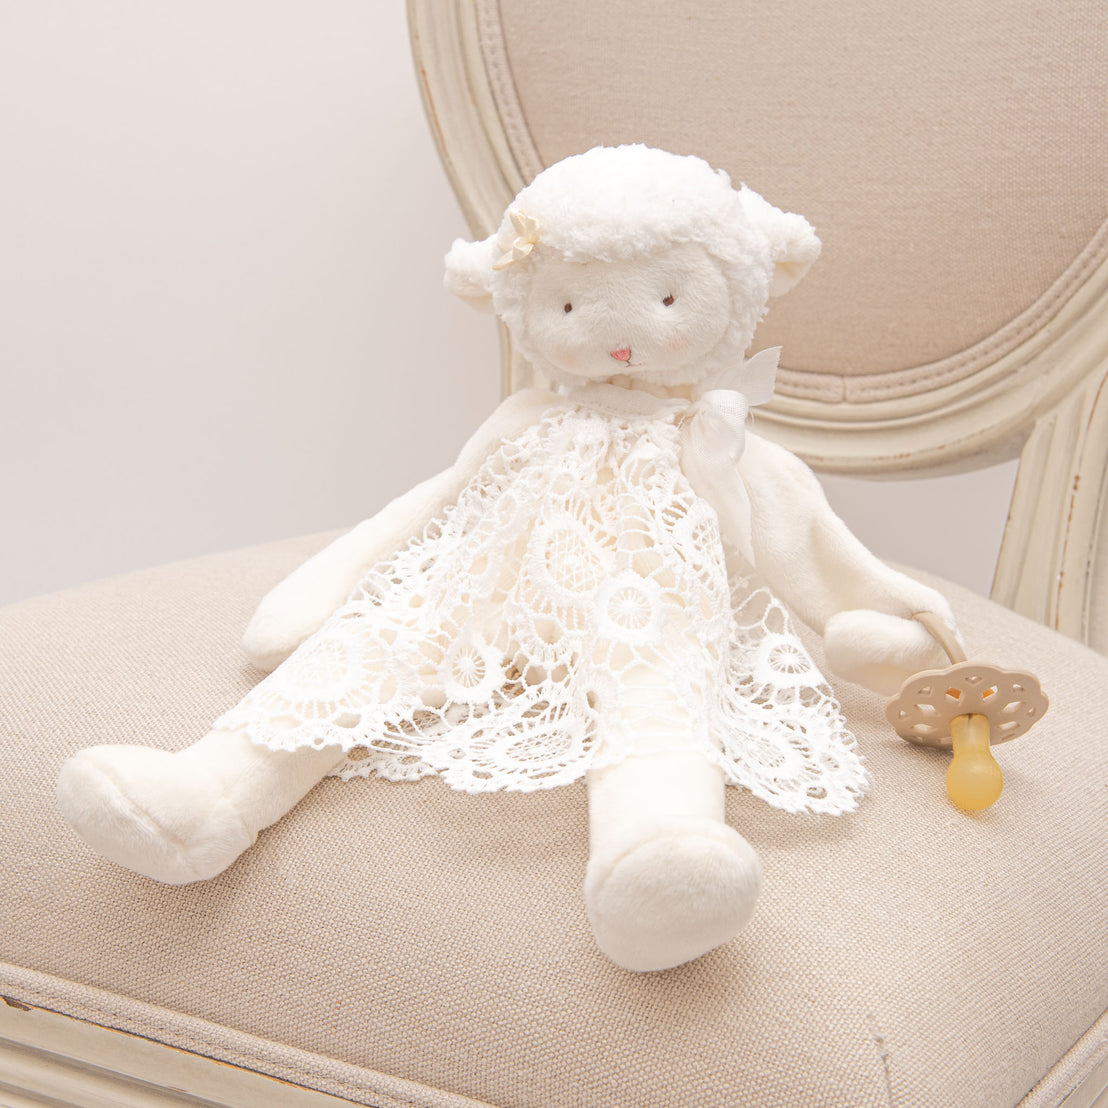 Plush lamb toy wearing dress made of lace material from the Poppy Christening Gown.